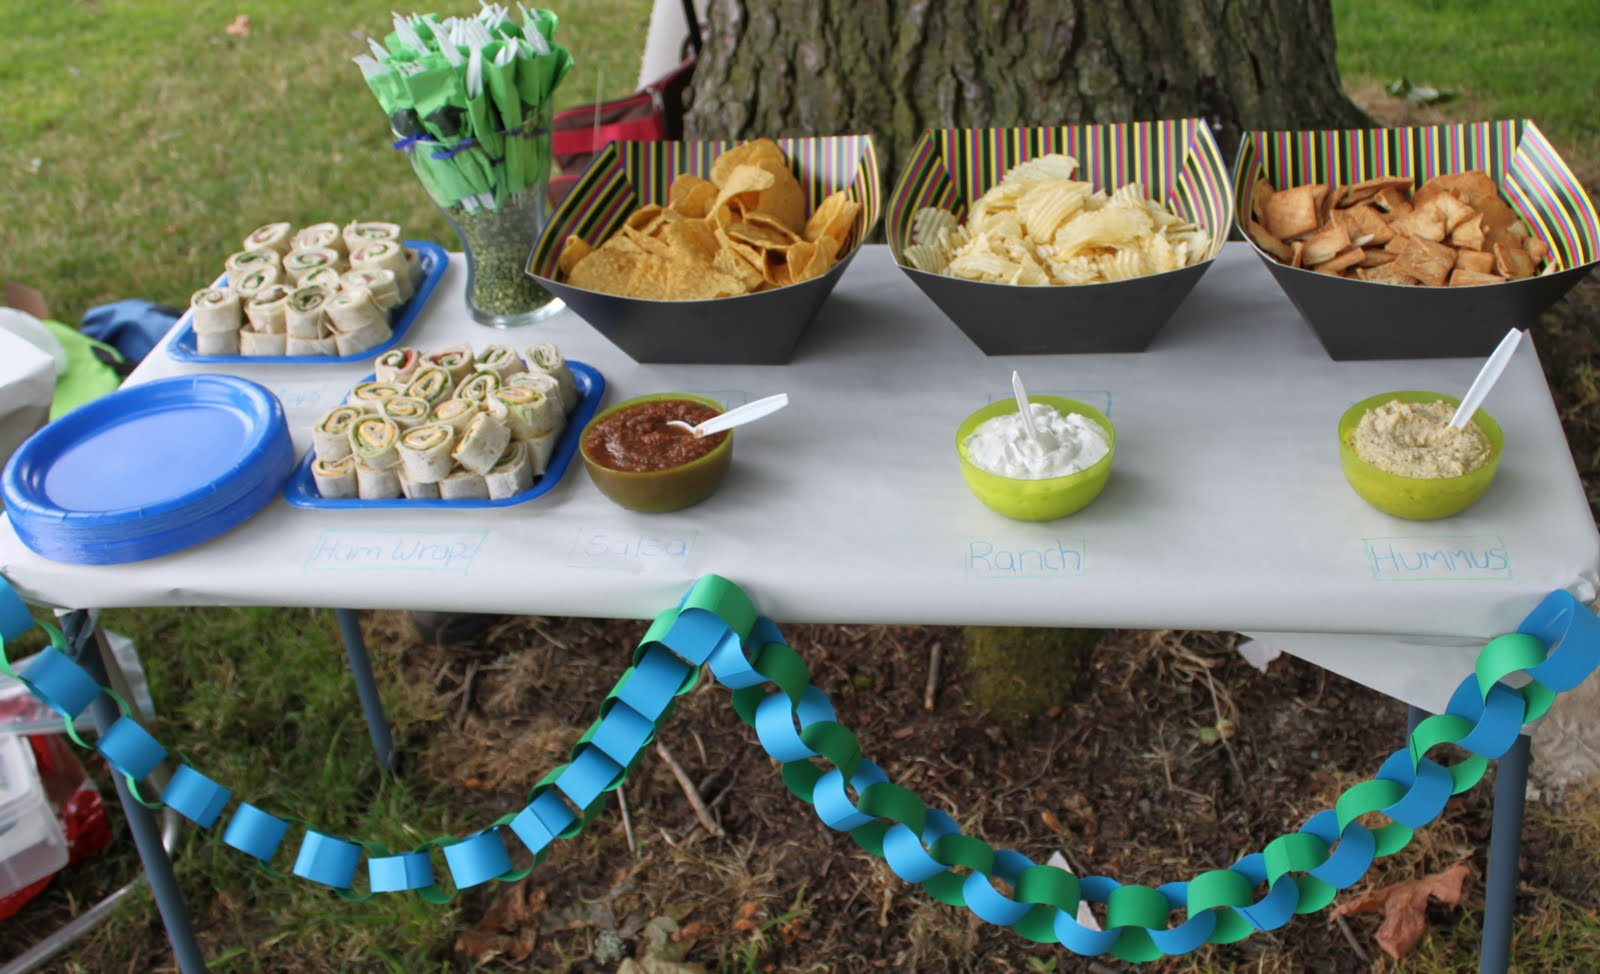 Outdoor College Graduation Party Ideas
 Hello My name is Mommy Graduation Party